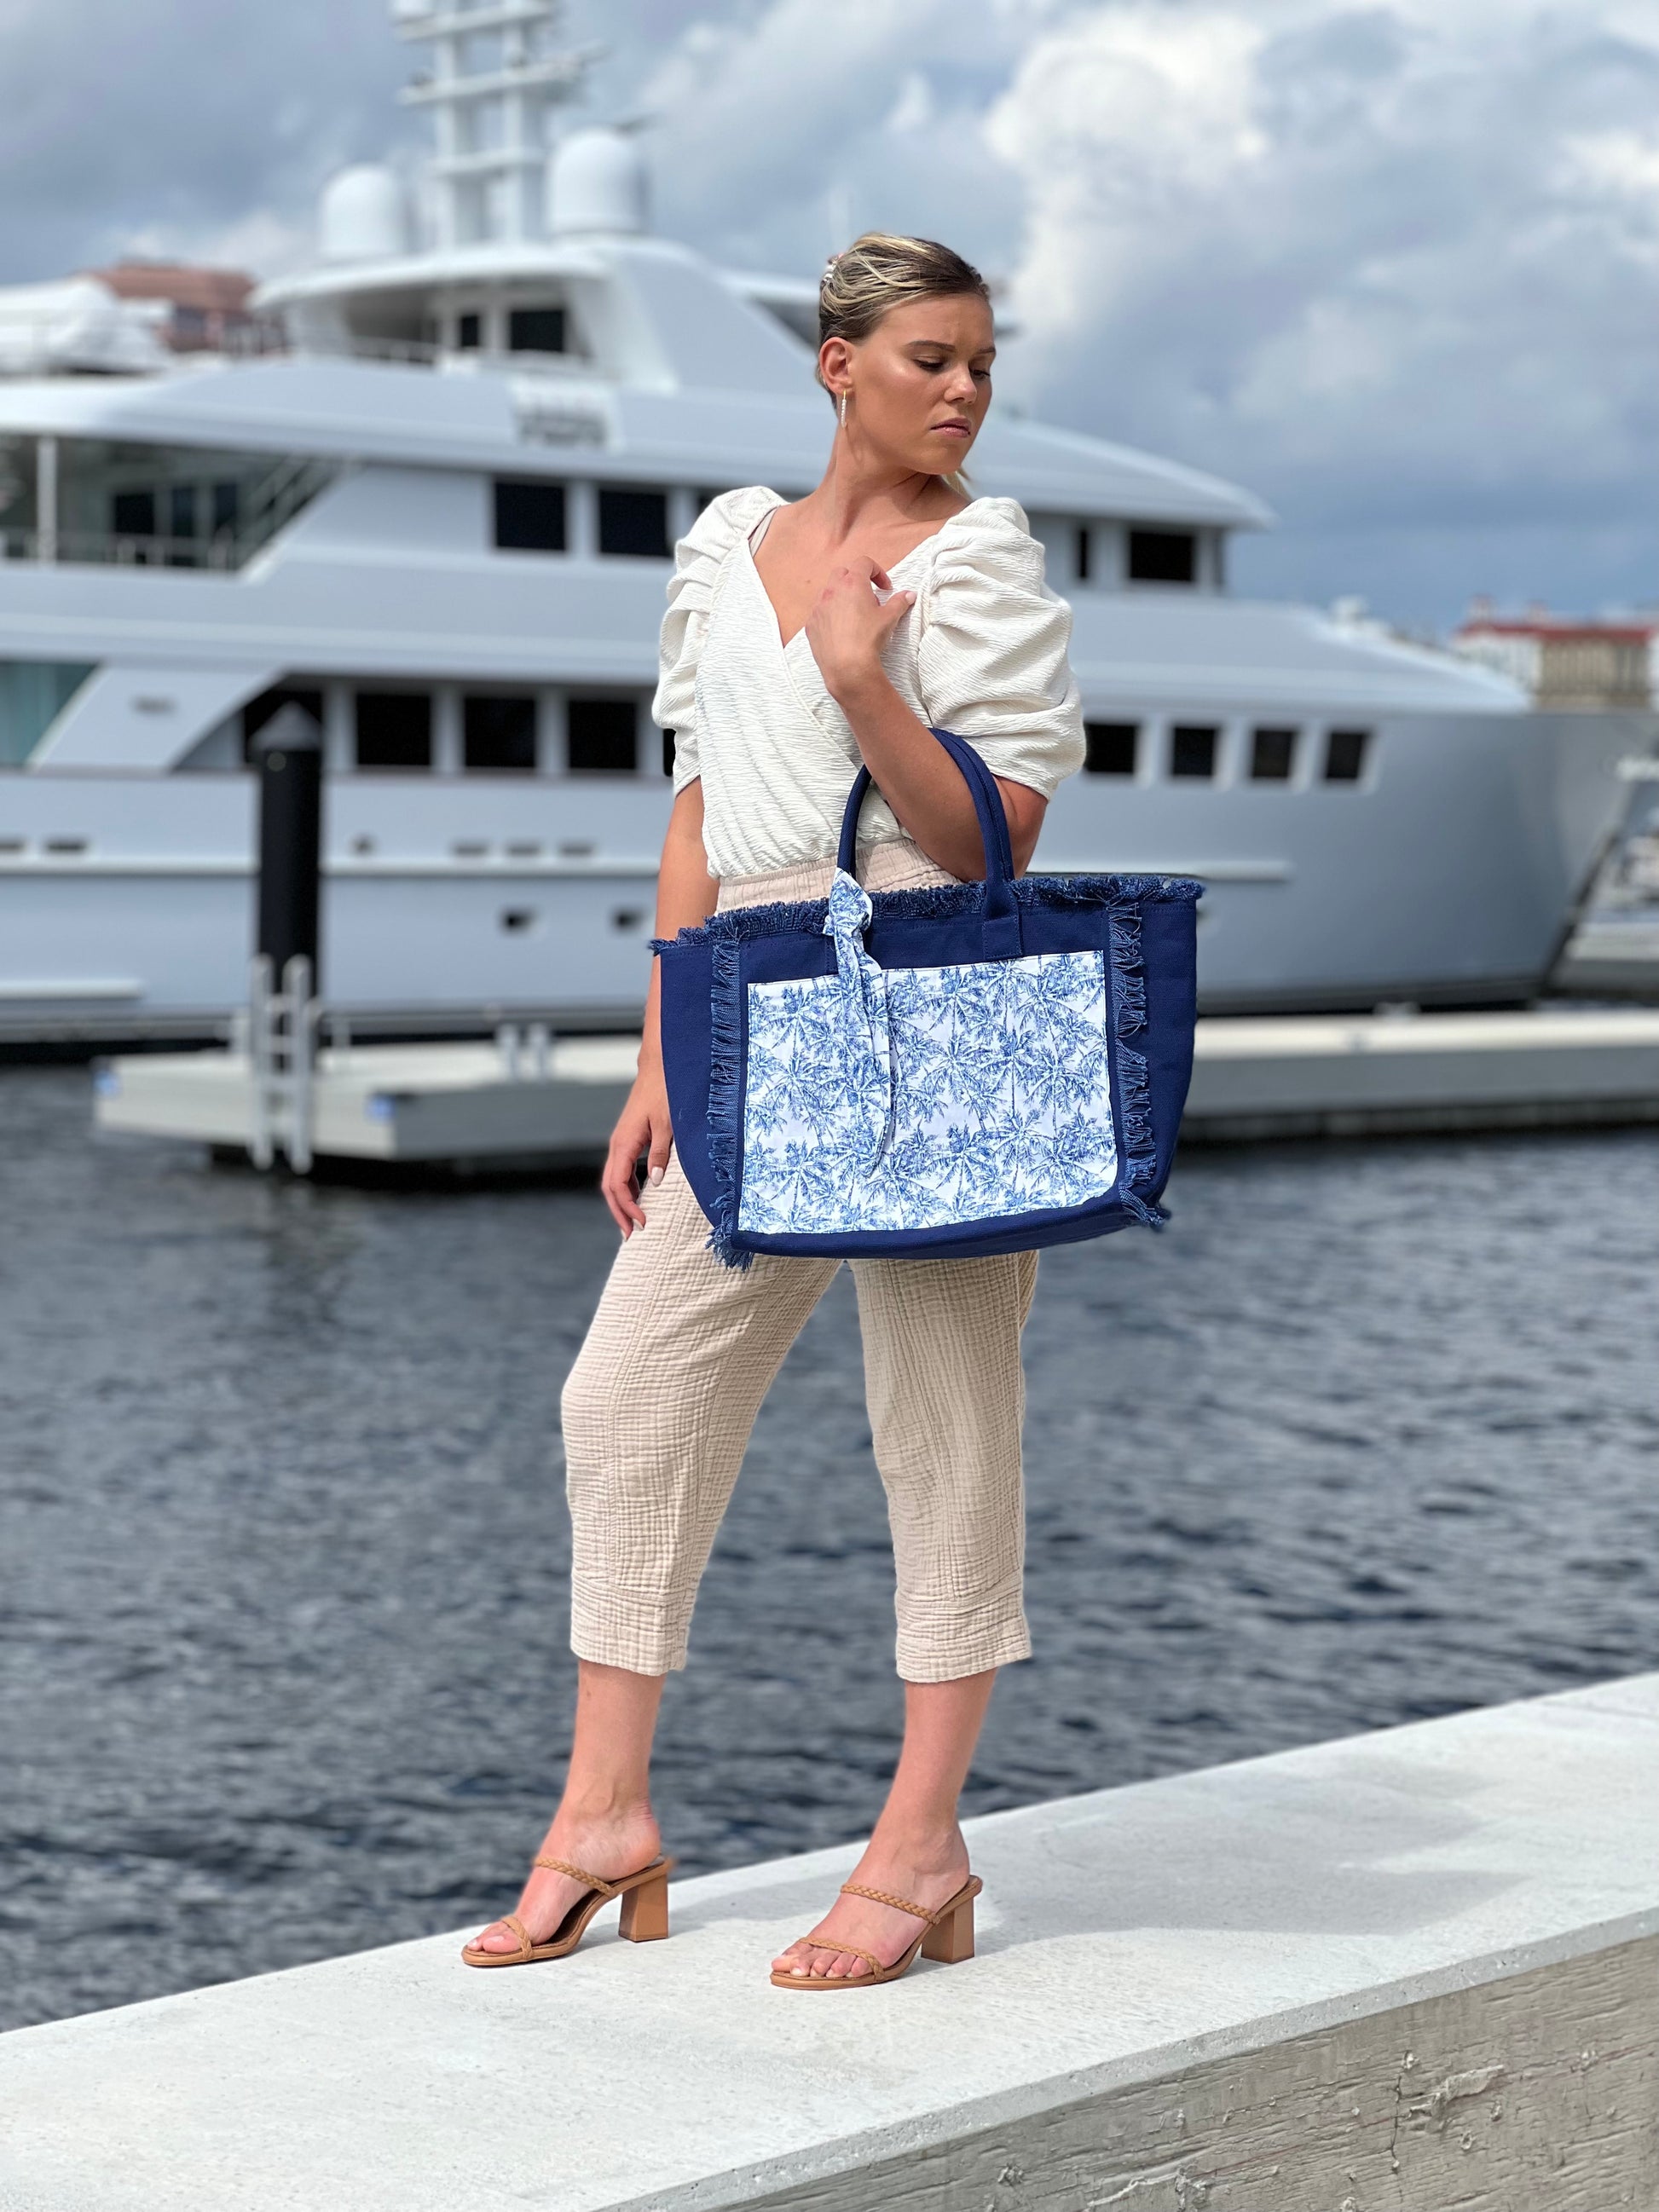 Yacht Carry-All Tote 